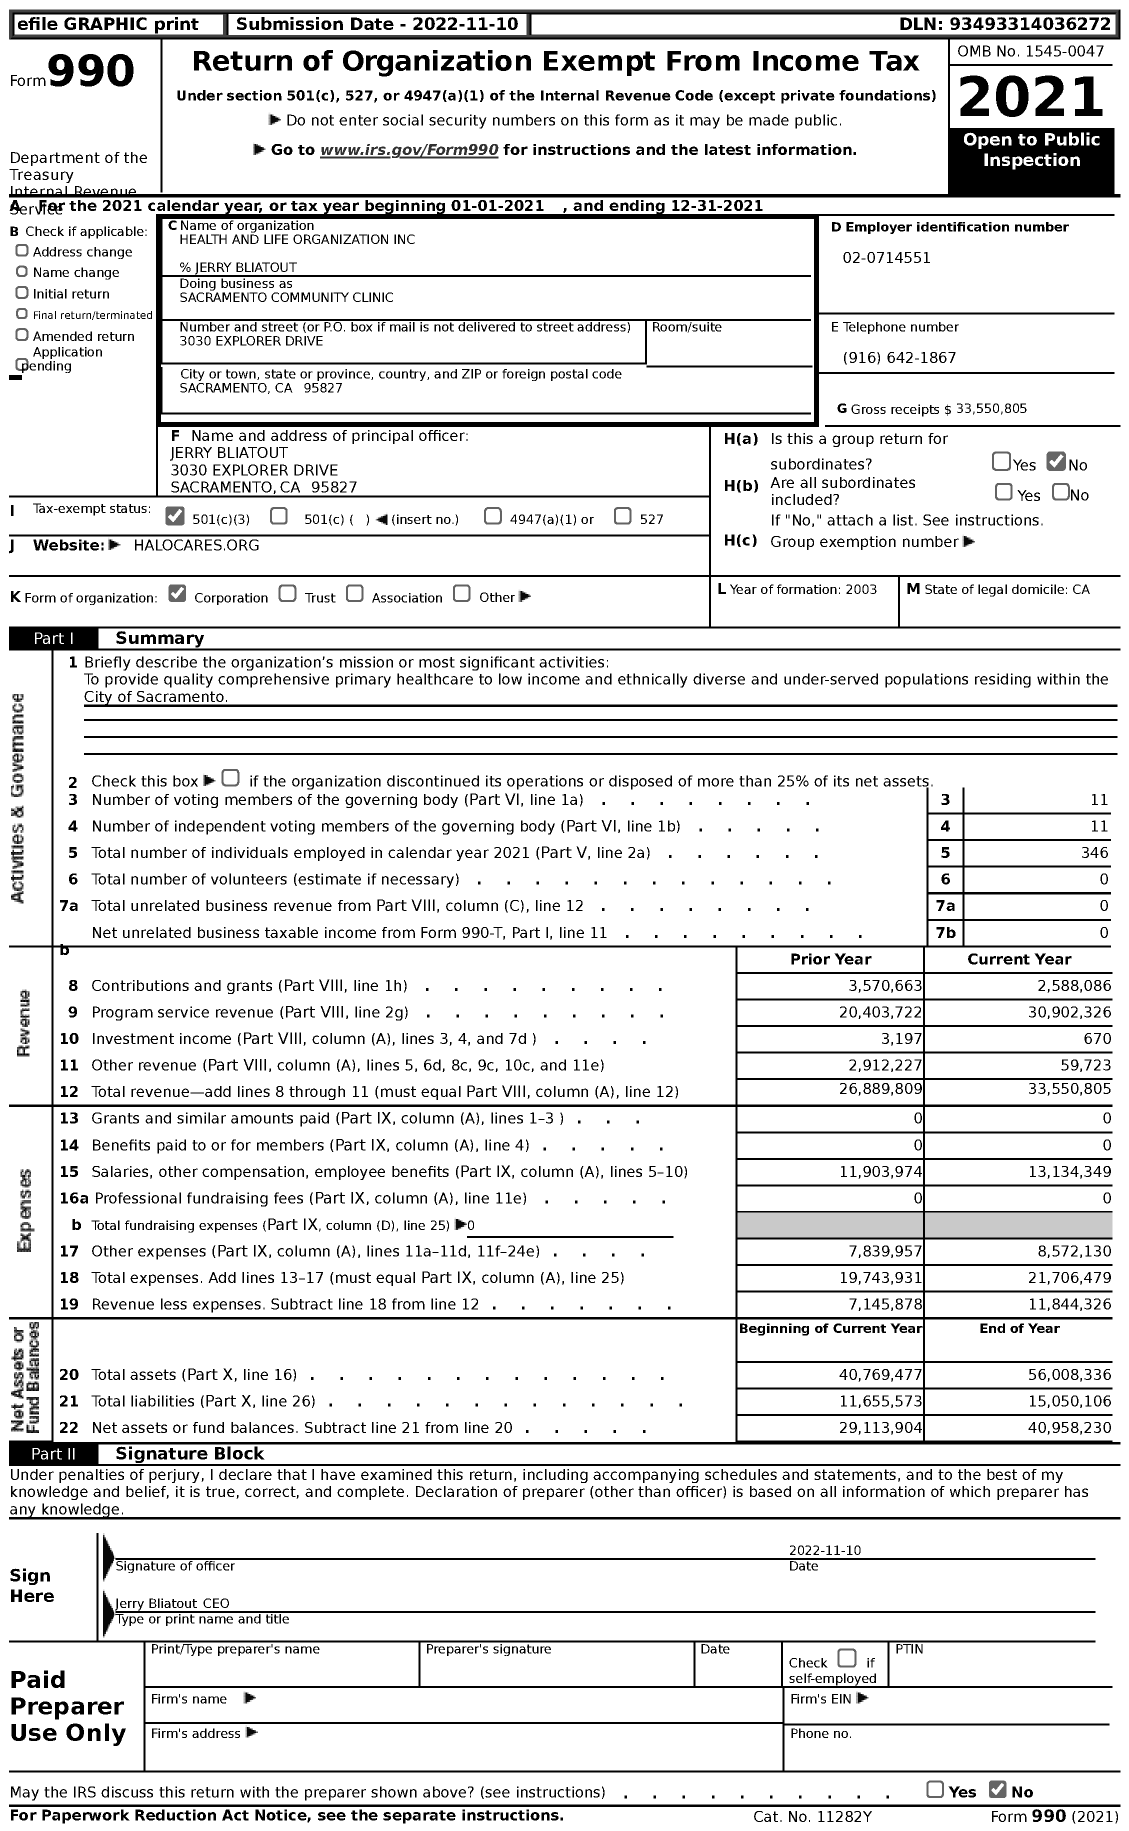 Image of first page of 2021 Form 990 for Health and Life Organization (HALO)